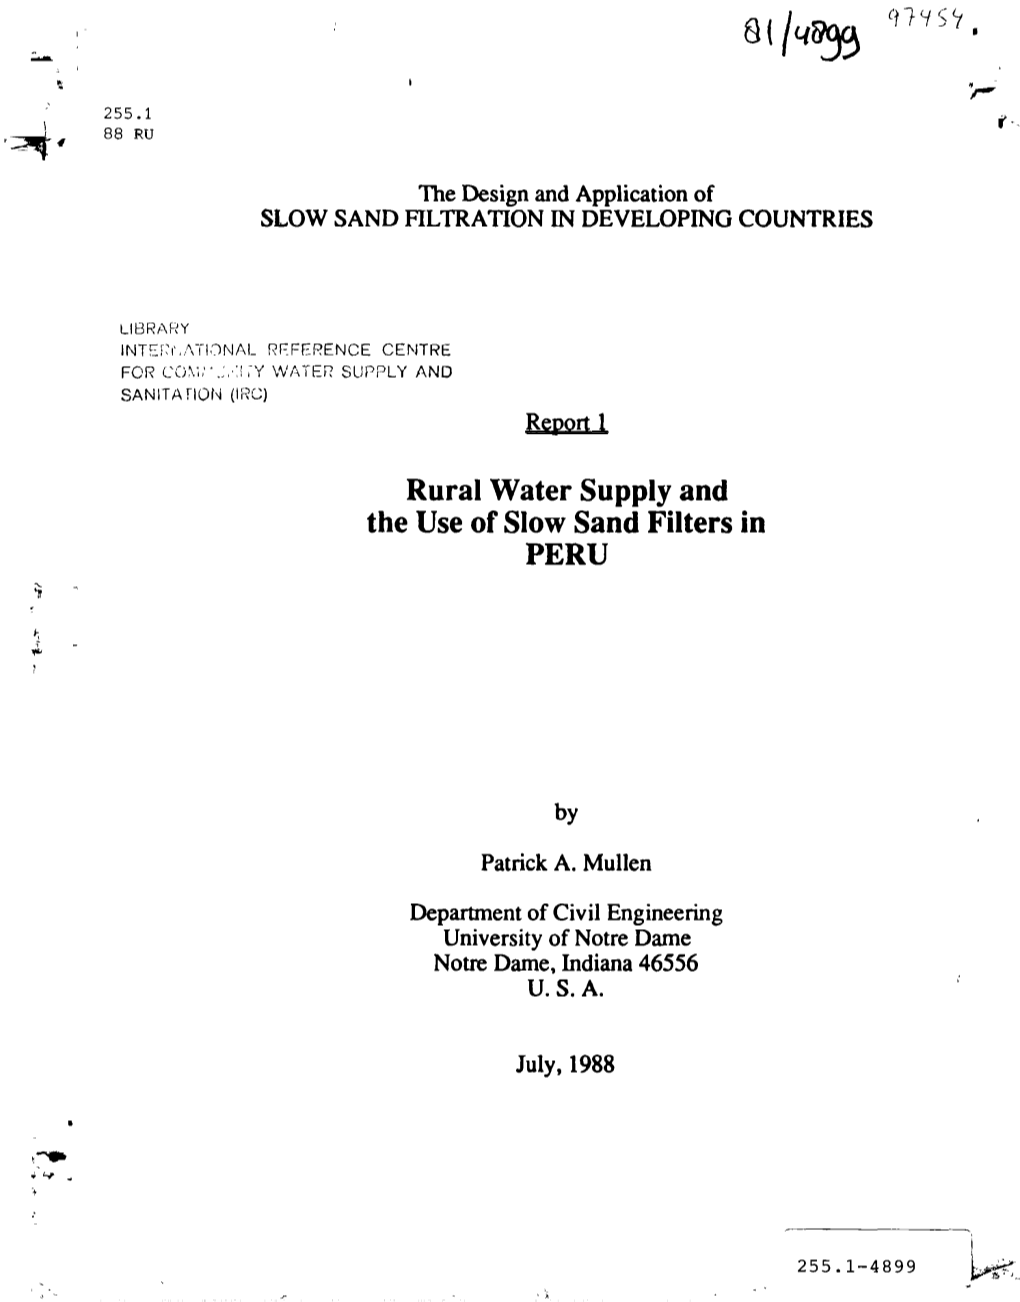 Rural Water Supply and the Use of Slow Sand Filters in PERU